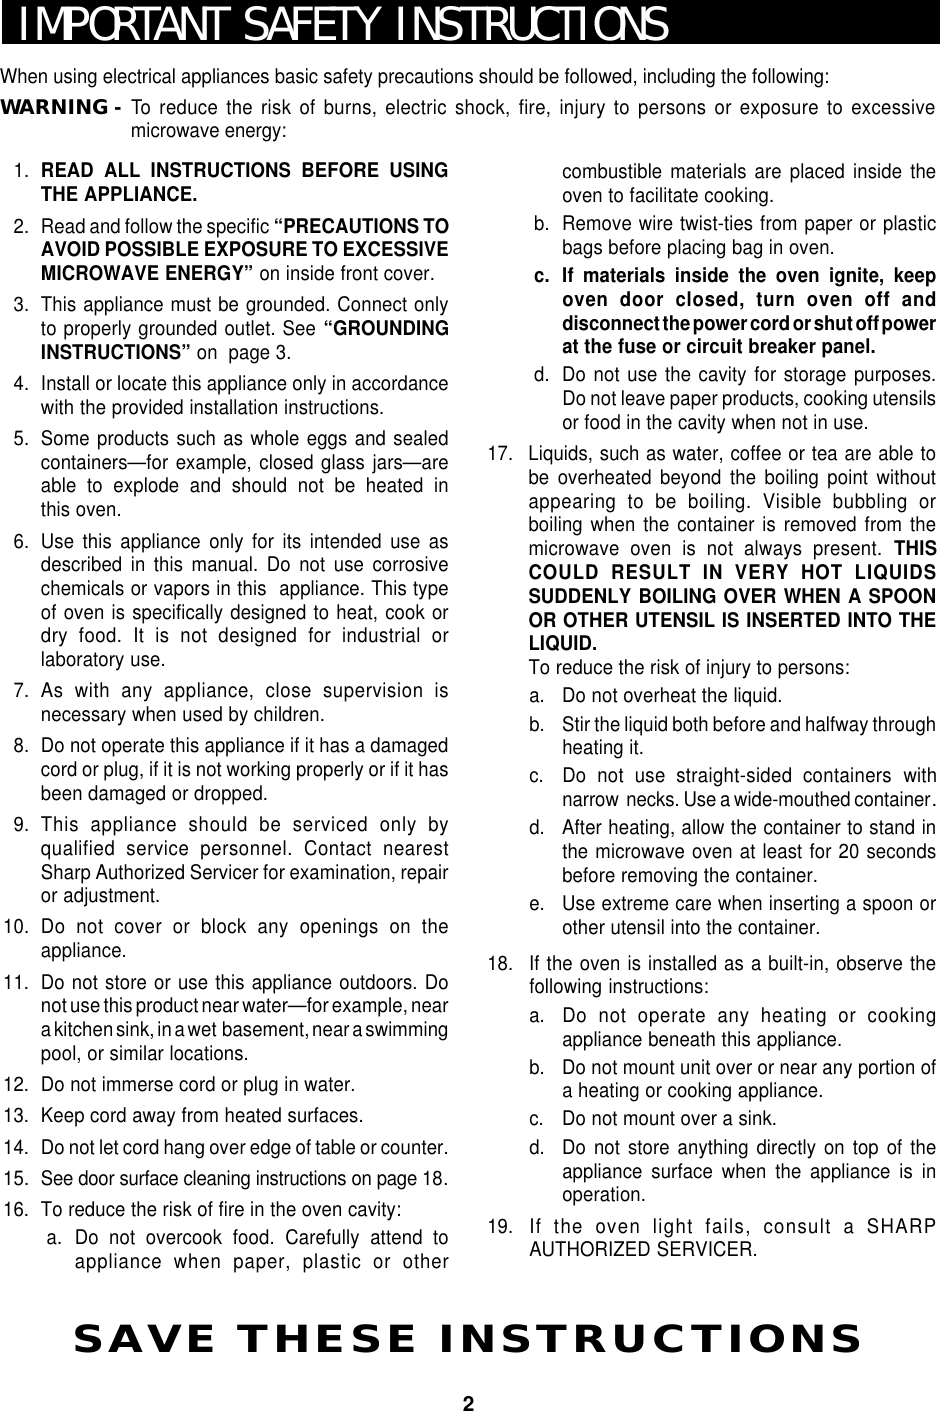 2IMPORTANT SAFETY INSTRUCTIONSWhen using electrical appliances basic safety precautions should be followed, including the following:WARNING -To  reduce the risk of burns, electric shock, fire, injury to persons or exposure to excessivemicrowave energy:SAVE THESE INSTRUCTIONS1. READ ALL INSTRUCTIONS BEFORE USINGTHE APPLIANCE.2. Read and follow the specific “PRECAUTIONS TOAVOID POSSIBLE EXPOSURE TO EXCESSIVEMICROWAVE ENERGY” on inside front cover.3. This appliance must be grounded. Connect onlyto properly grounded outlet. See “GROUNDINGINSTRUCTIONS” on  page 3.4. Install or locate this appliance only in accordancewith the provided installation instructions.5. Some products such as whole eggs and sealedcontainers—for example, closed glass jars—areable to explode and should not be heated inthis oven.6. Use this appliance only for its intended use asdescribed in this manual. Do not use corrosivechemicals or vapors in this  appliance. This typeof oven is specifically designed to heat, cook ordry food. It is not designed for industrial orlaboratory use.7. As with any appliance, close supervision isnecessary when used by children.8. Do not operate this appliance if it has a damagedcord or plug, if it is not working properly or if it hasbeen damaged or dropped.9. This appliance should be serviced only byqualified service personnel. Contact nearestSharp Authorized Servicer for examination, repairor adjustment.10. Do not cover or block any openings on theappliance.11. Do not store or use this appliance outdoors. Donot use this product near water—for example, neara kitchen sink, in a wet  basement, near a swimmingpool, or similar locations.12. Do not immerse cord or plug in water.13. Keep cord away from heated surfaces.14. Do not let cord hang over edge of table or counter.15. See door surface cleaning instructions on page 18.16. To reduce the risk of fire in the oven cavity:a. Do not overcook food. Carefully attend toappliance when paper, plastic or othercombustible materials are placed inside theoven to facilitate cooking.b. Remove wire twist-ties from paper or plasticbags before placing bag in oven.c. If materials inside the oven ignite, keepoven door closed, turn oven off anddisconnect the power cord or shut off powerat the fuse or circuit breaker panel.d. Do not use the cavity for storage purposes.Do not leave paper products, cooking utensilsor food in the cavity when not in use.17. Liquids, such as water, coffee or tea are able tobe overheated beyond the boiling point withoutappearing to be boiling. Visible bubbling orboiling when the container is removed from themicrowave oven is not always present. THISCOULD RESULT IN VERY HOT LIQUIDSSUDDENLY BOILING OVER WHEN A SPOONOR OTHER UTENSIL IS INSERTED INTO THELIQUID.To reduce the risk of injury to persons:a. Do not overheat the liquid.b. Stir the liquid both before and halfway throughheating it.c. Do not use straight-sided containers withnarrow  necks. Use a wide-mouthed container.d. After heating, allow the container to stand inthe microwave oven at least for 20 secondsbefore removing the container.e. Use extreme care when inserting a spoon orother utensil into the container.18. If the oven is installed as a built-in, observe thefollowing instructions:a. Do not operate any heating or cookingappliance beneath this appliance.b. Do not mount unit over or near any portion ofa heating or cooking appliance.c. Do not mount over a sink.d. Do not store anything directly on top of theappliance surface when the appliance is inoperation.19. If the oven light fails, consult a SHARPAUTHORIZED SERVICER.